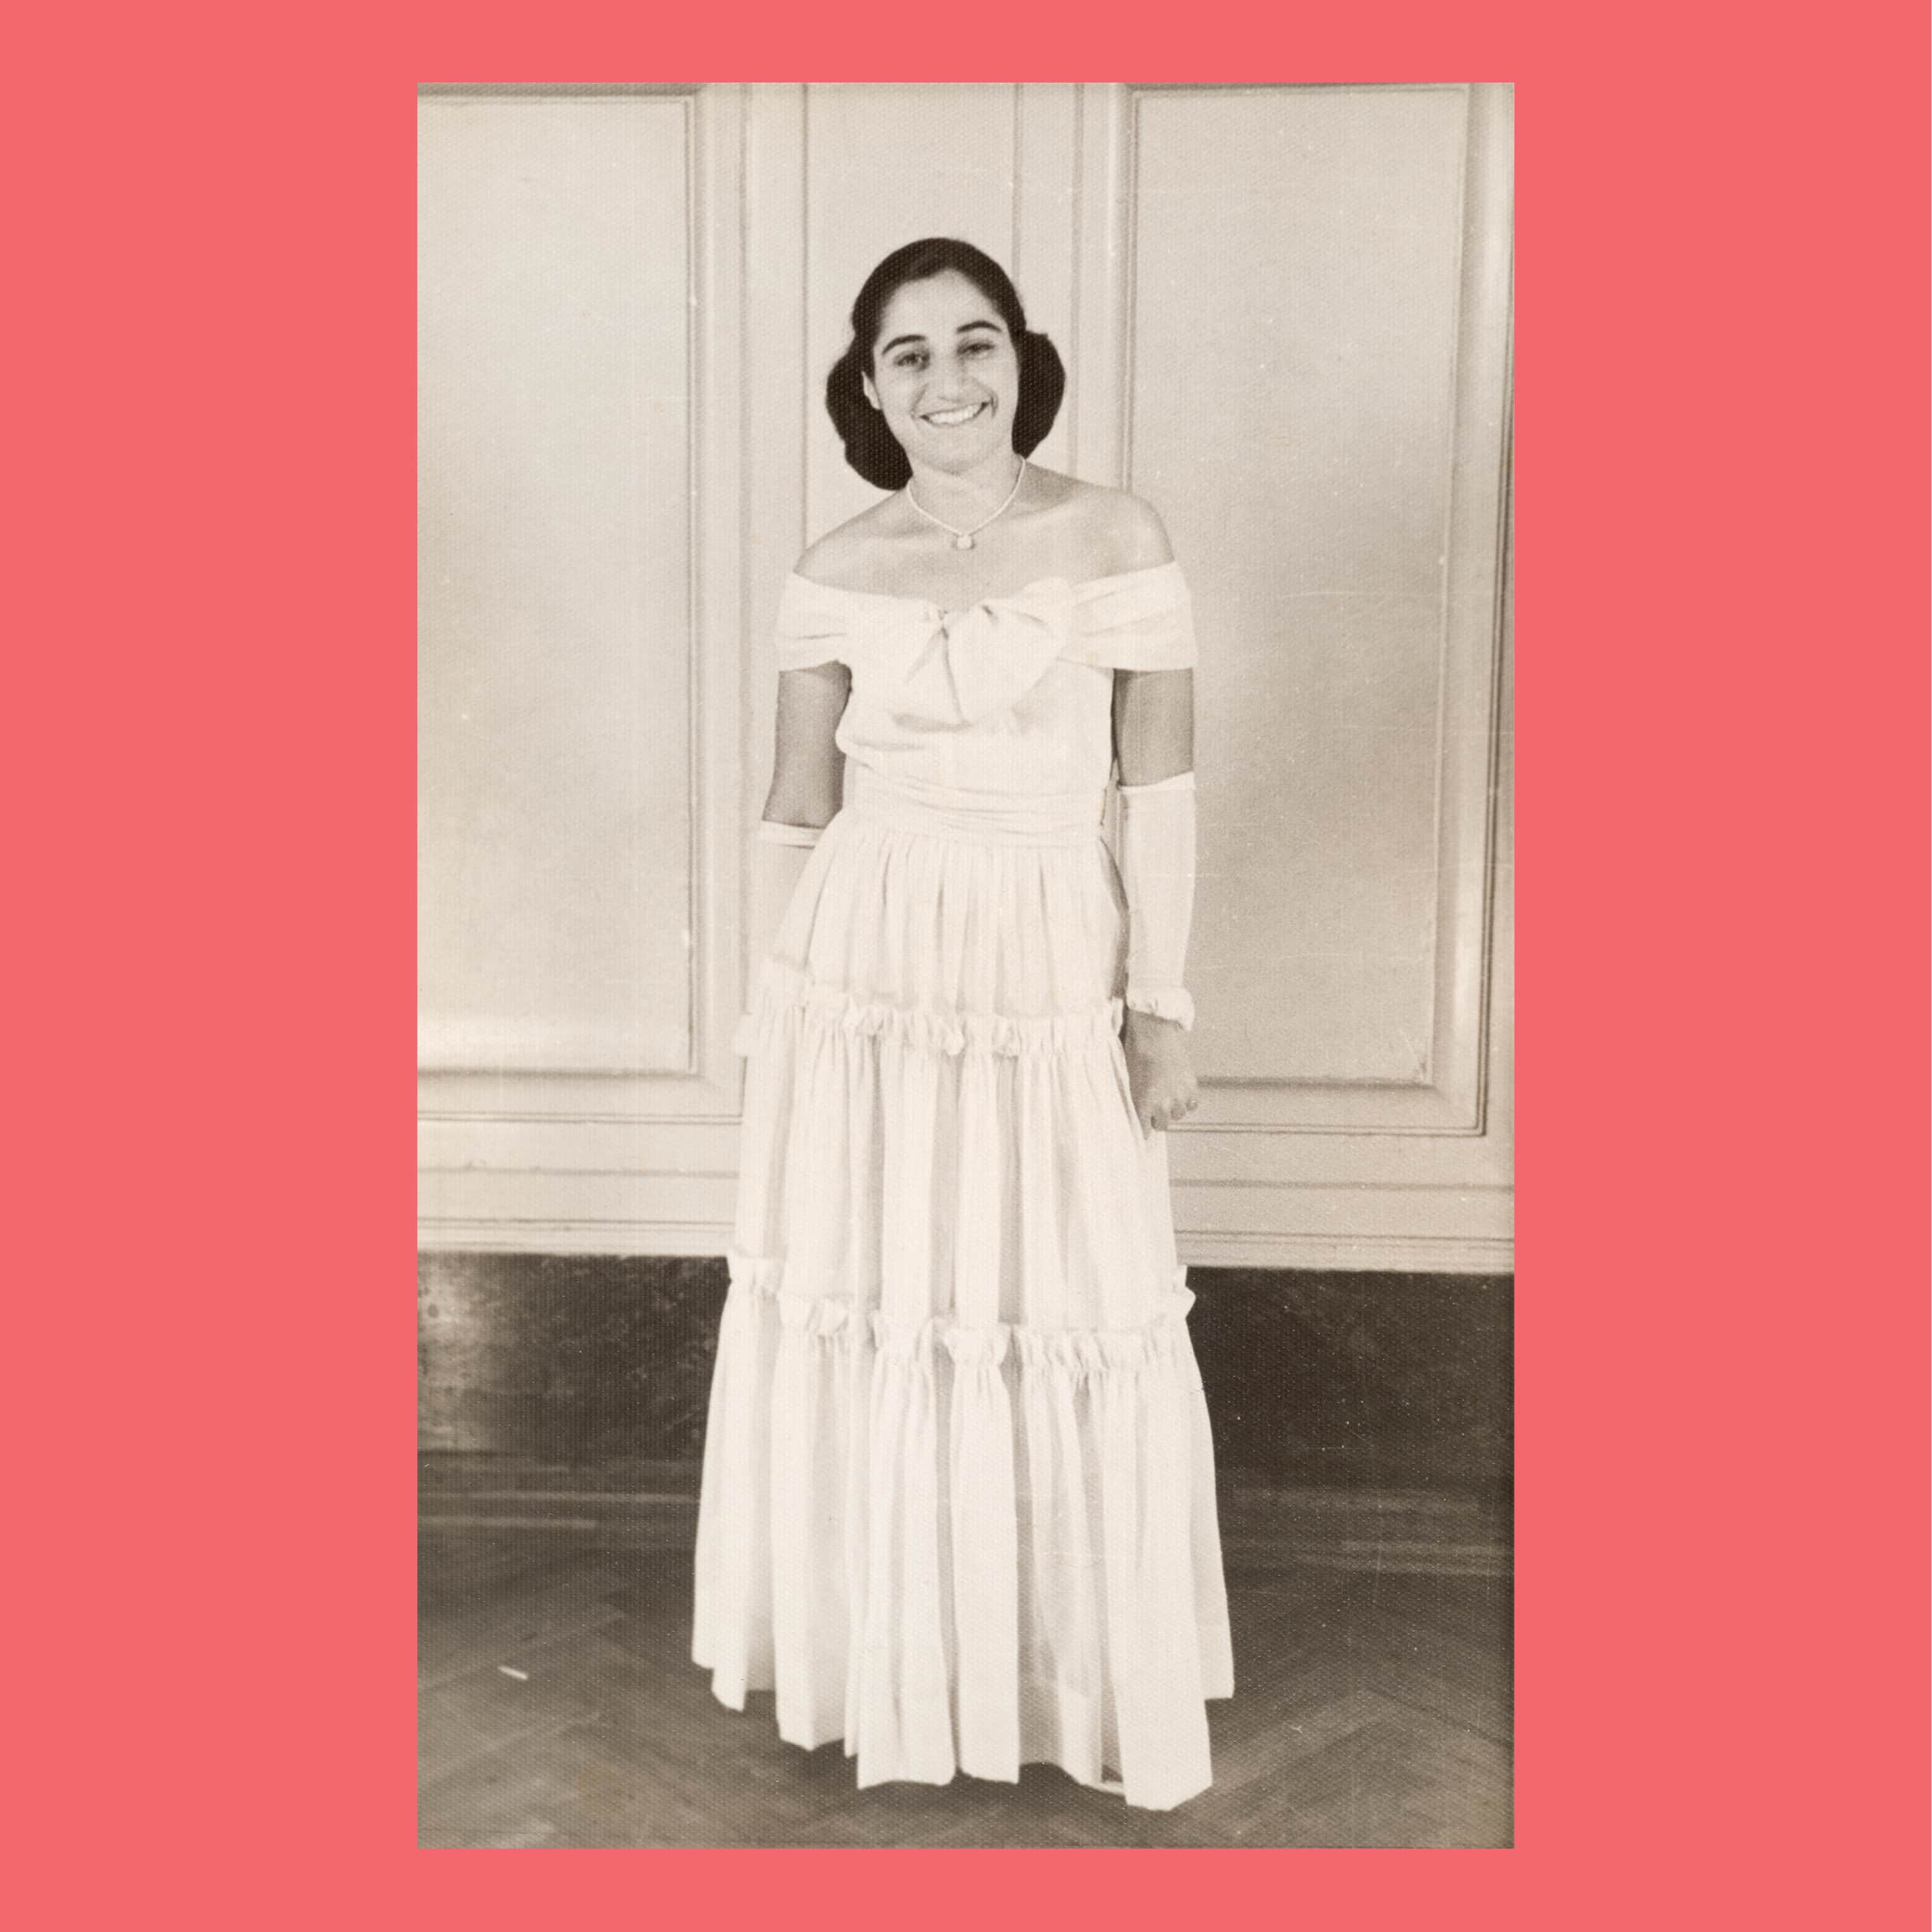 Elite Photos (Melbourne, active c. 1865–1950s), Eve S Weiss at the Dental Ball, 1948, photograph, 13.8 × 8.8 cm. HFADM 3311, gift of Kerry, Sally and Michael Landman 2016, Henry Forman Atkinson Dental Museum, University of Melbourne. 